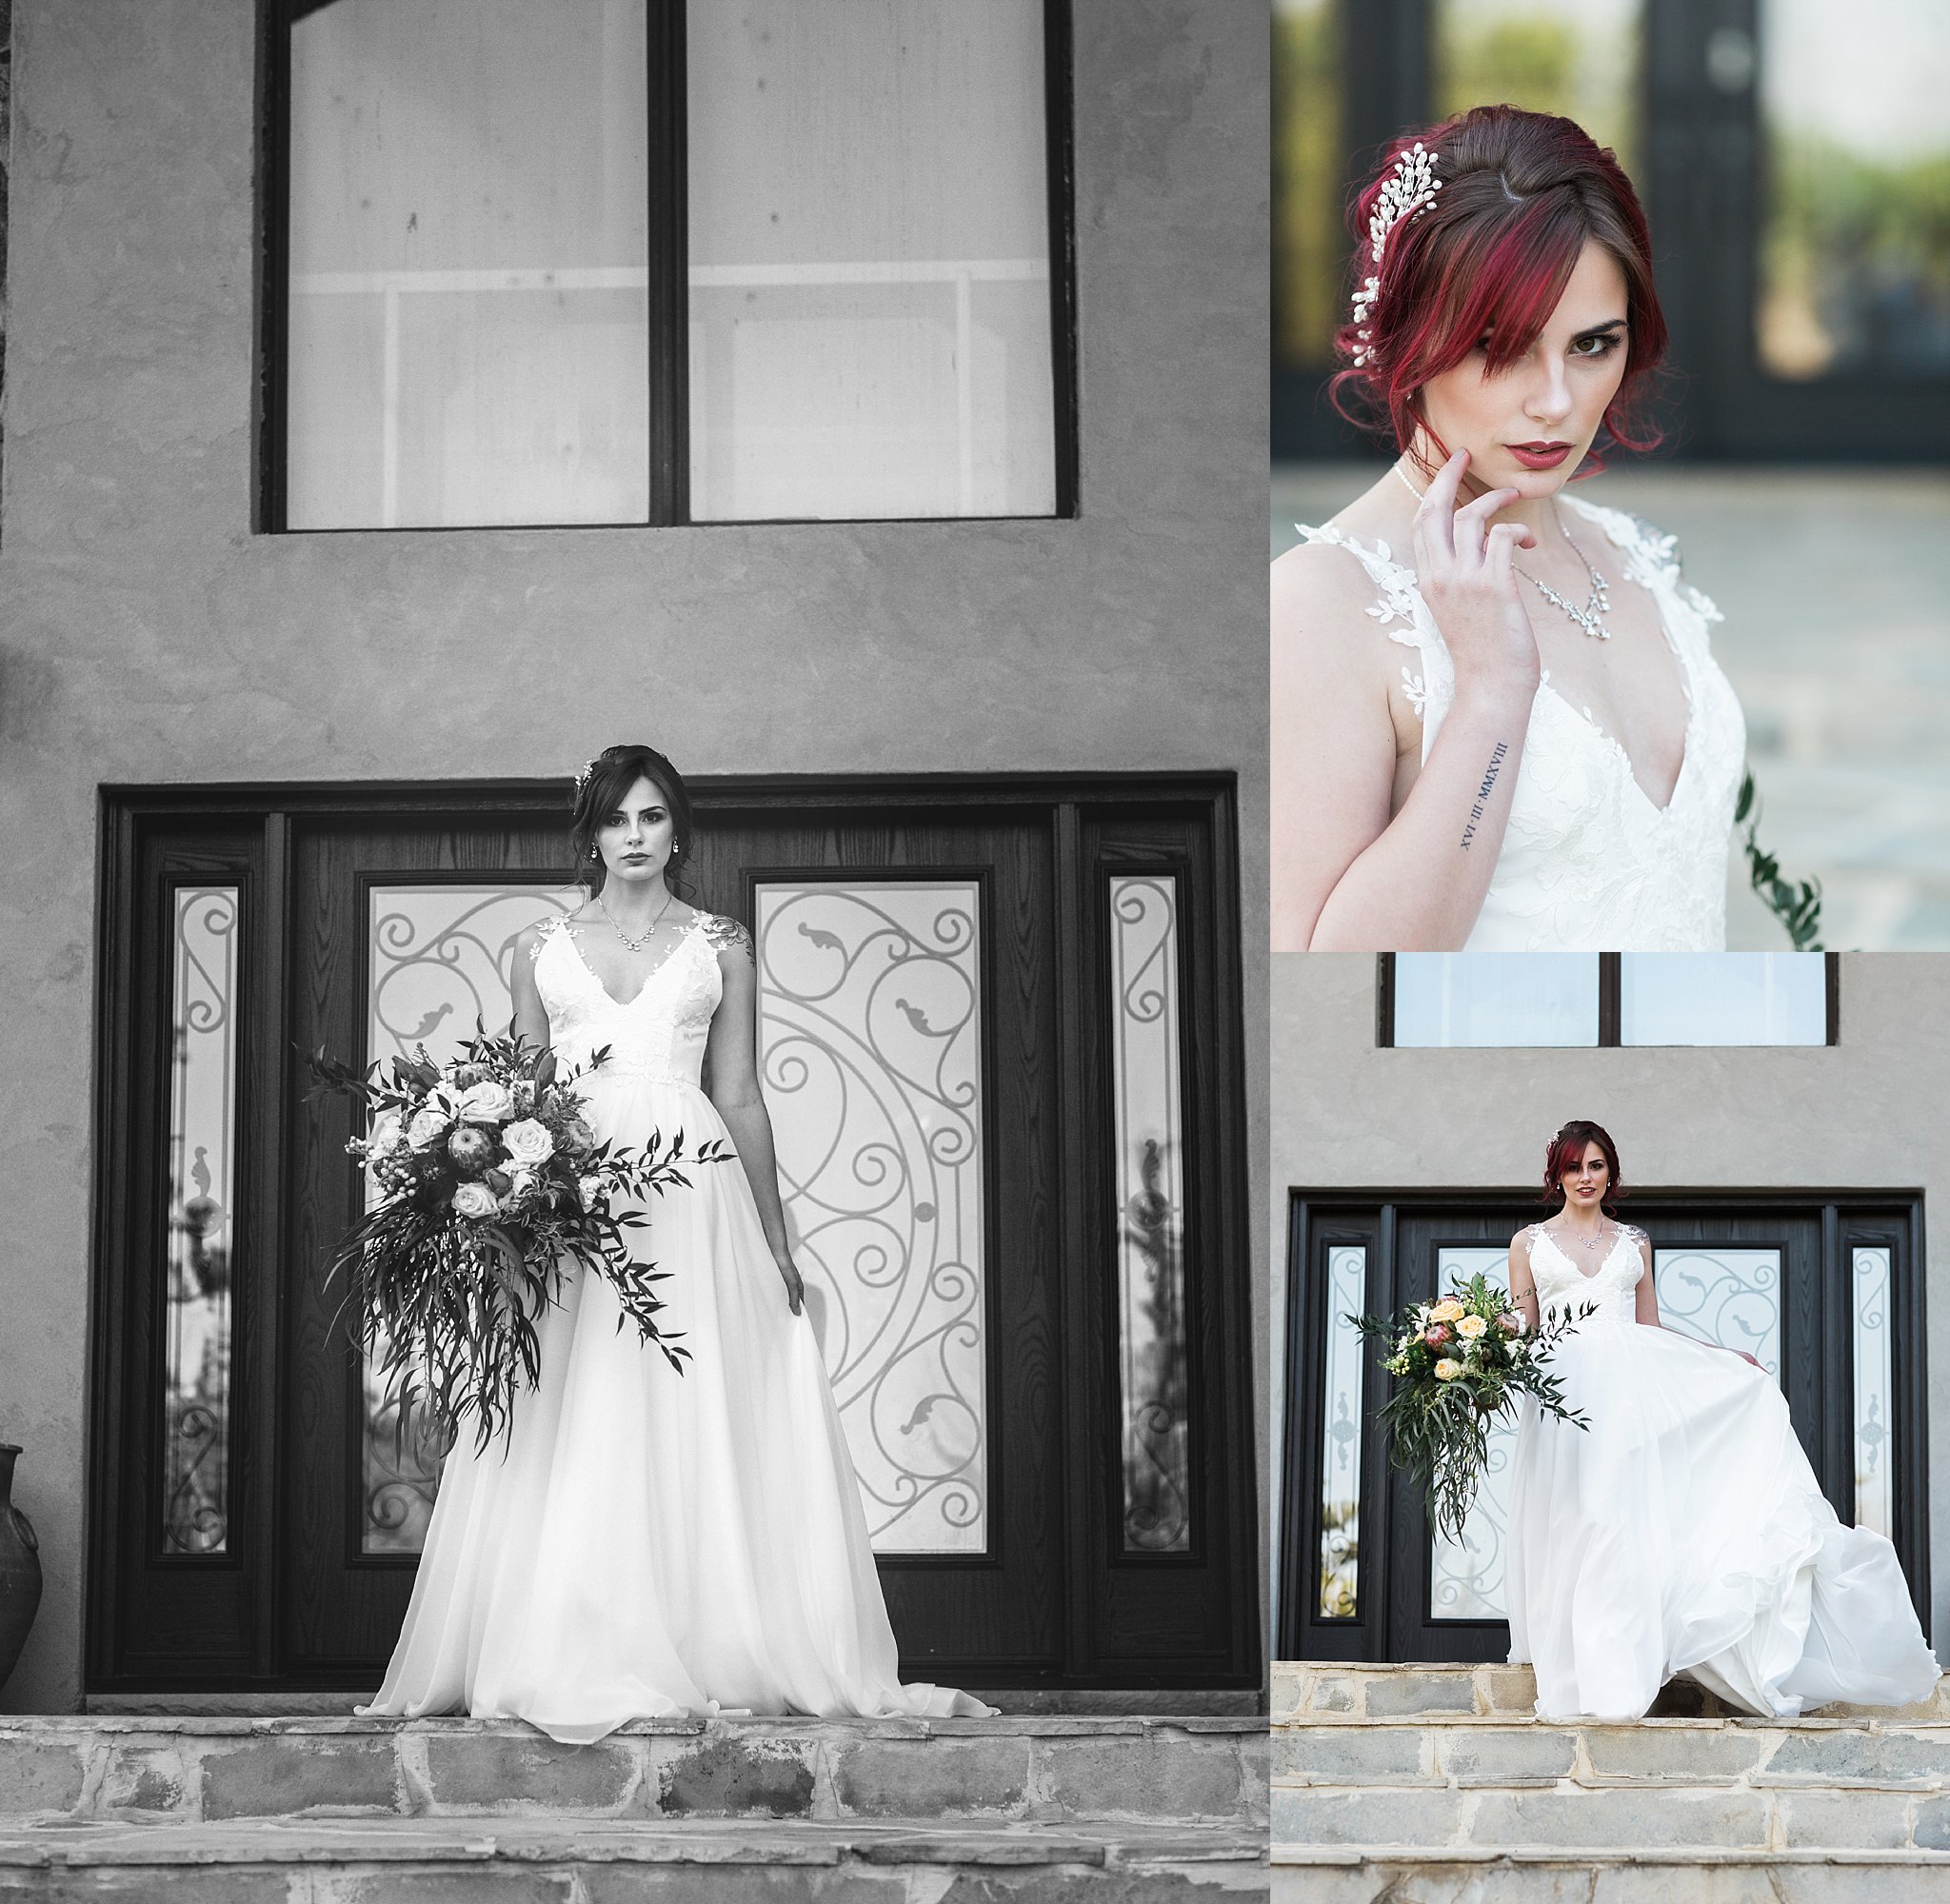 Sarnia, Windsor, London, Ontario, wedding, photography, photographer, photos, bride, venue, book, best, dress, venues, st. Thomas, Kitchener, Waterloo, Cambridge, Guelph, Canada, light, airy, colour, love, popular, top, bride, groom, inspiration, inspirational, pinterest, Nature, Oasis, retreat, outdoor, wedding, weddings, married, officiant, forest, flowers, bouquet, custom, boutique, experience, adventure, elopement